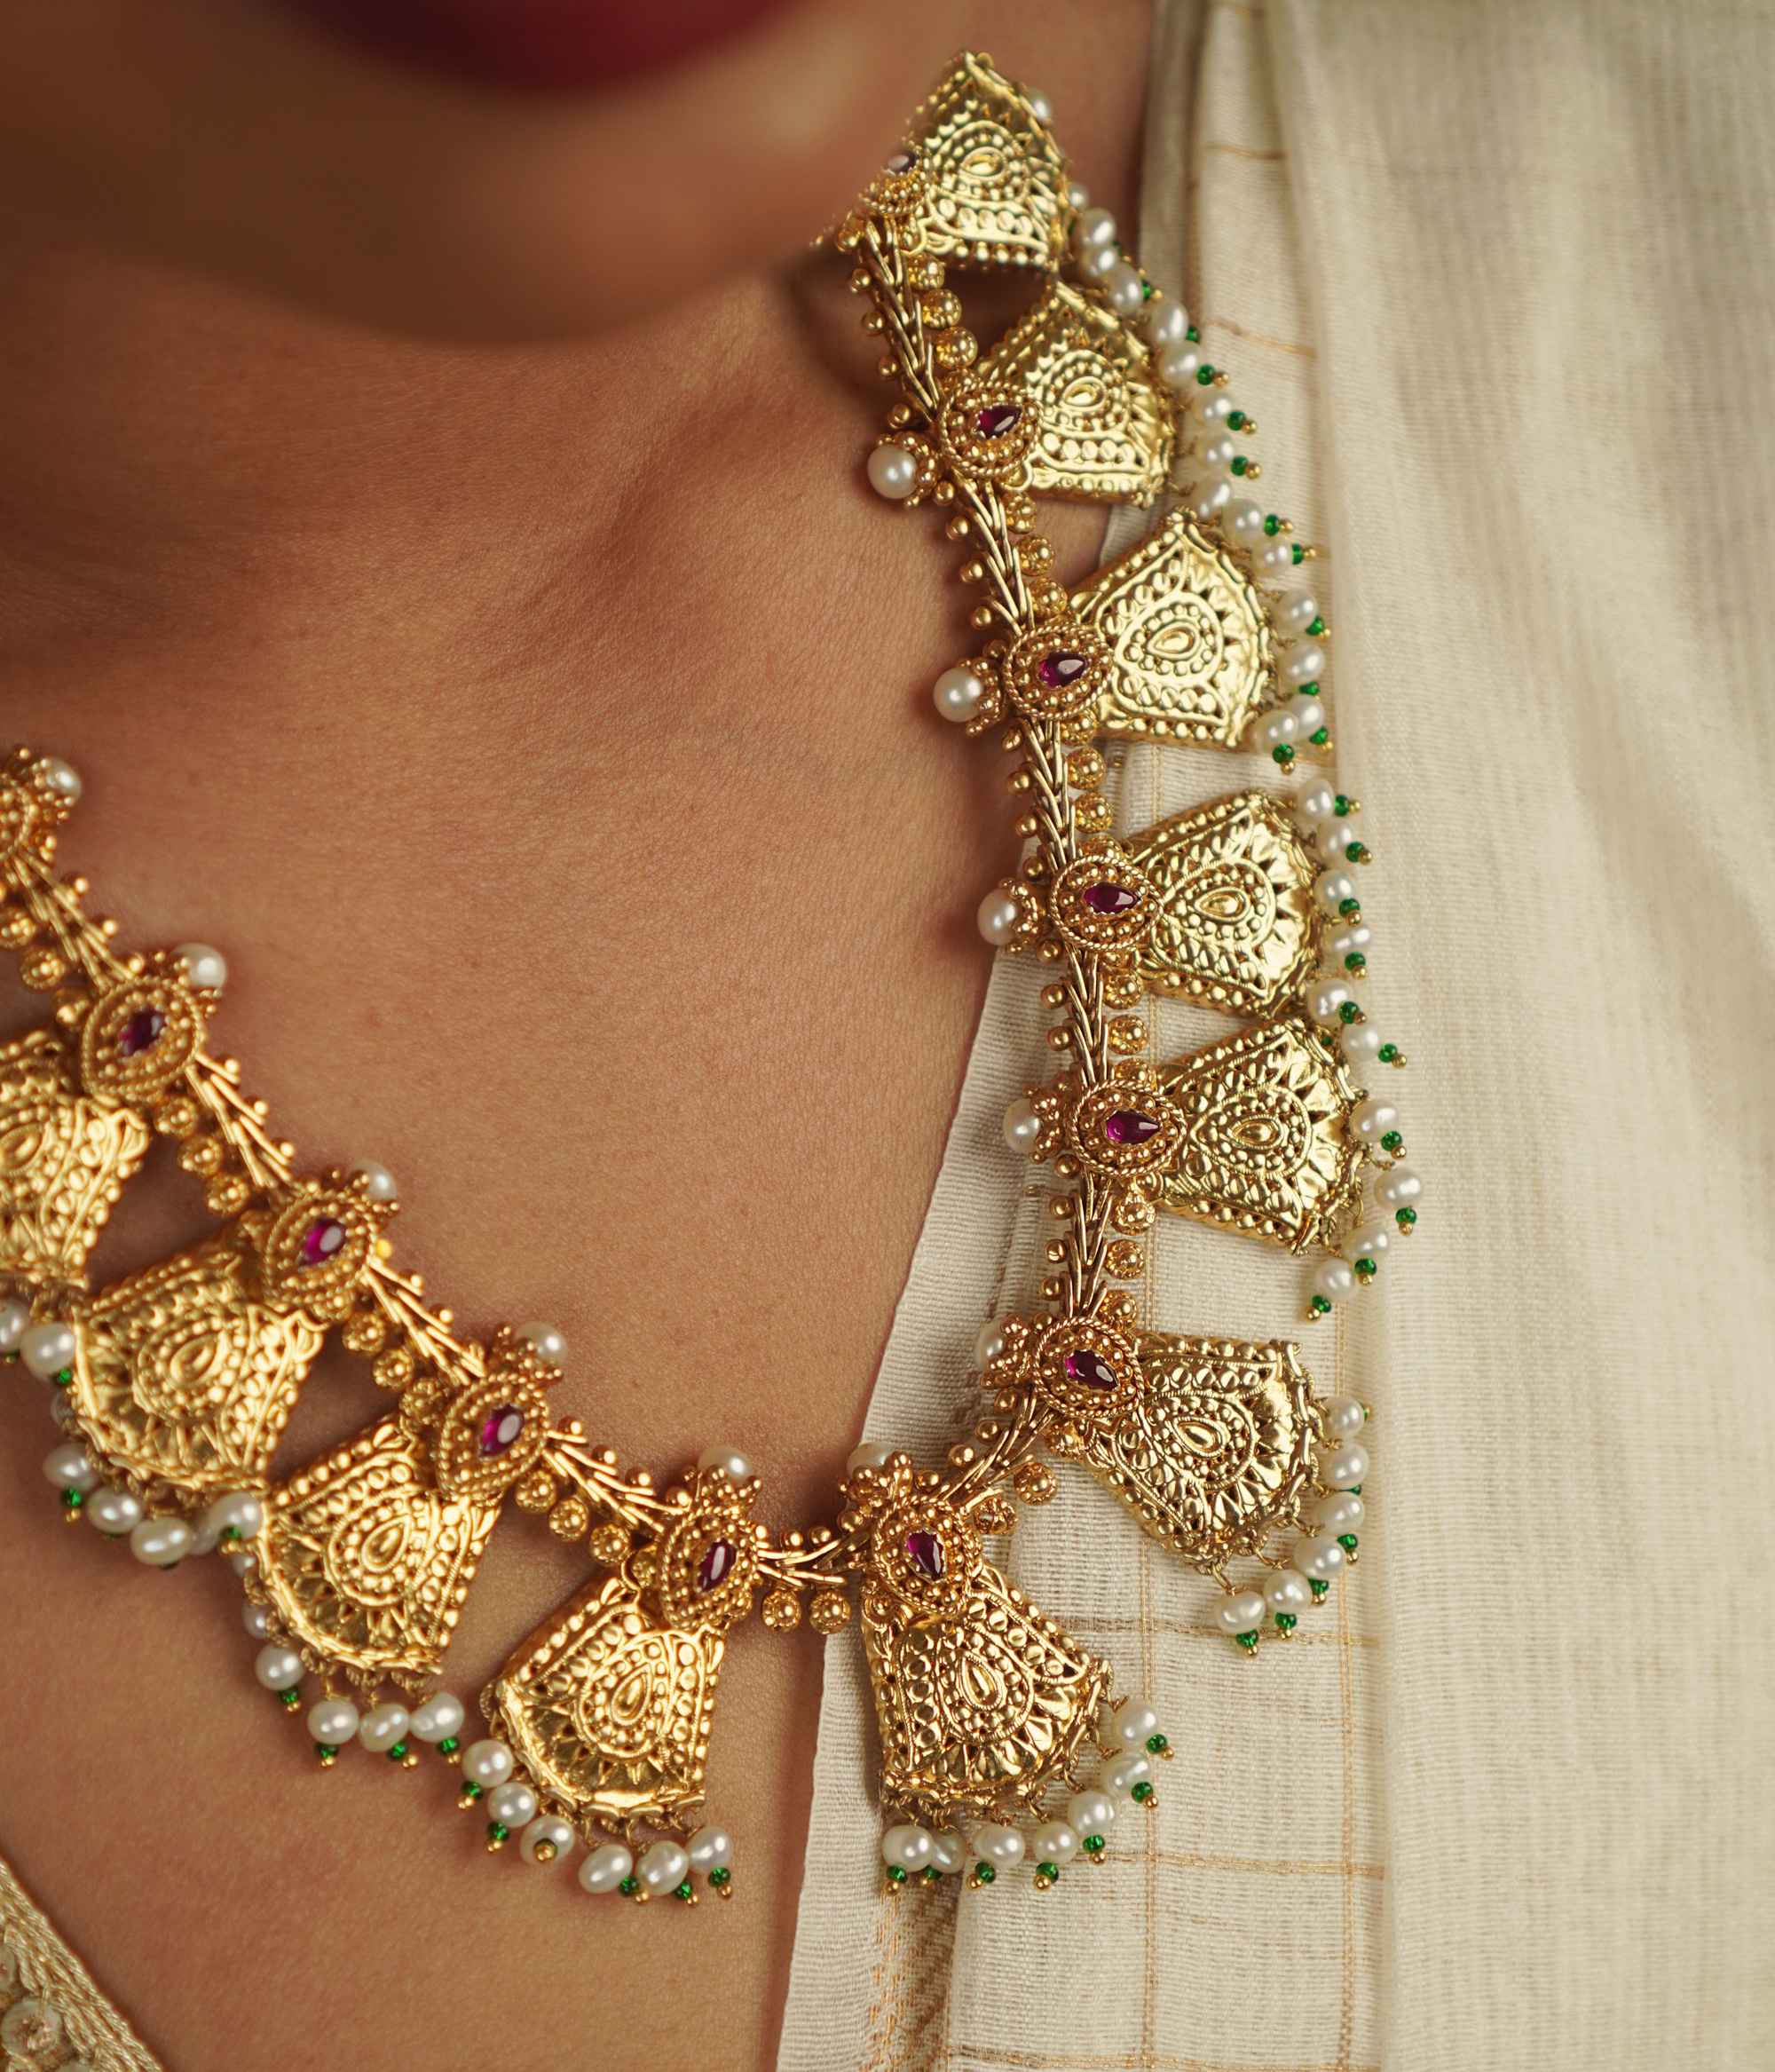 Amshula Temple Necklace